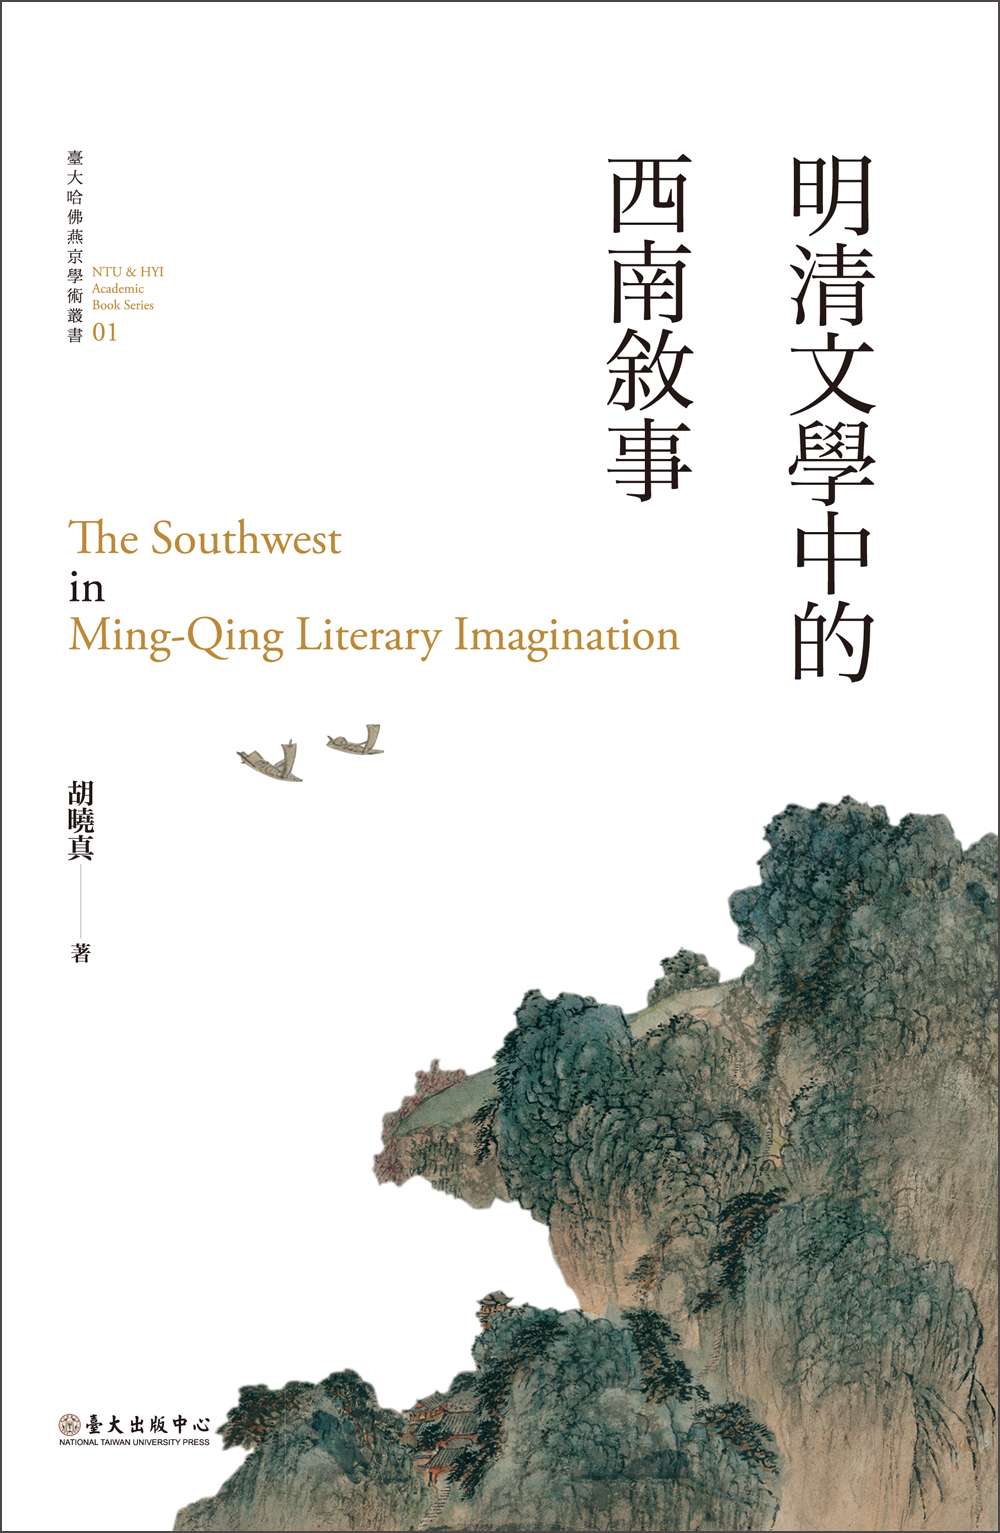 The Southwest in Ming-Qing Literary Imagination (out of print)(limited edition hardback)